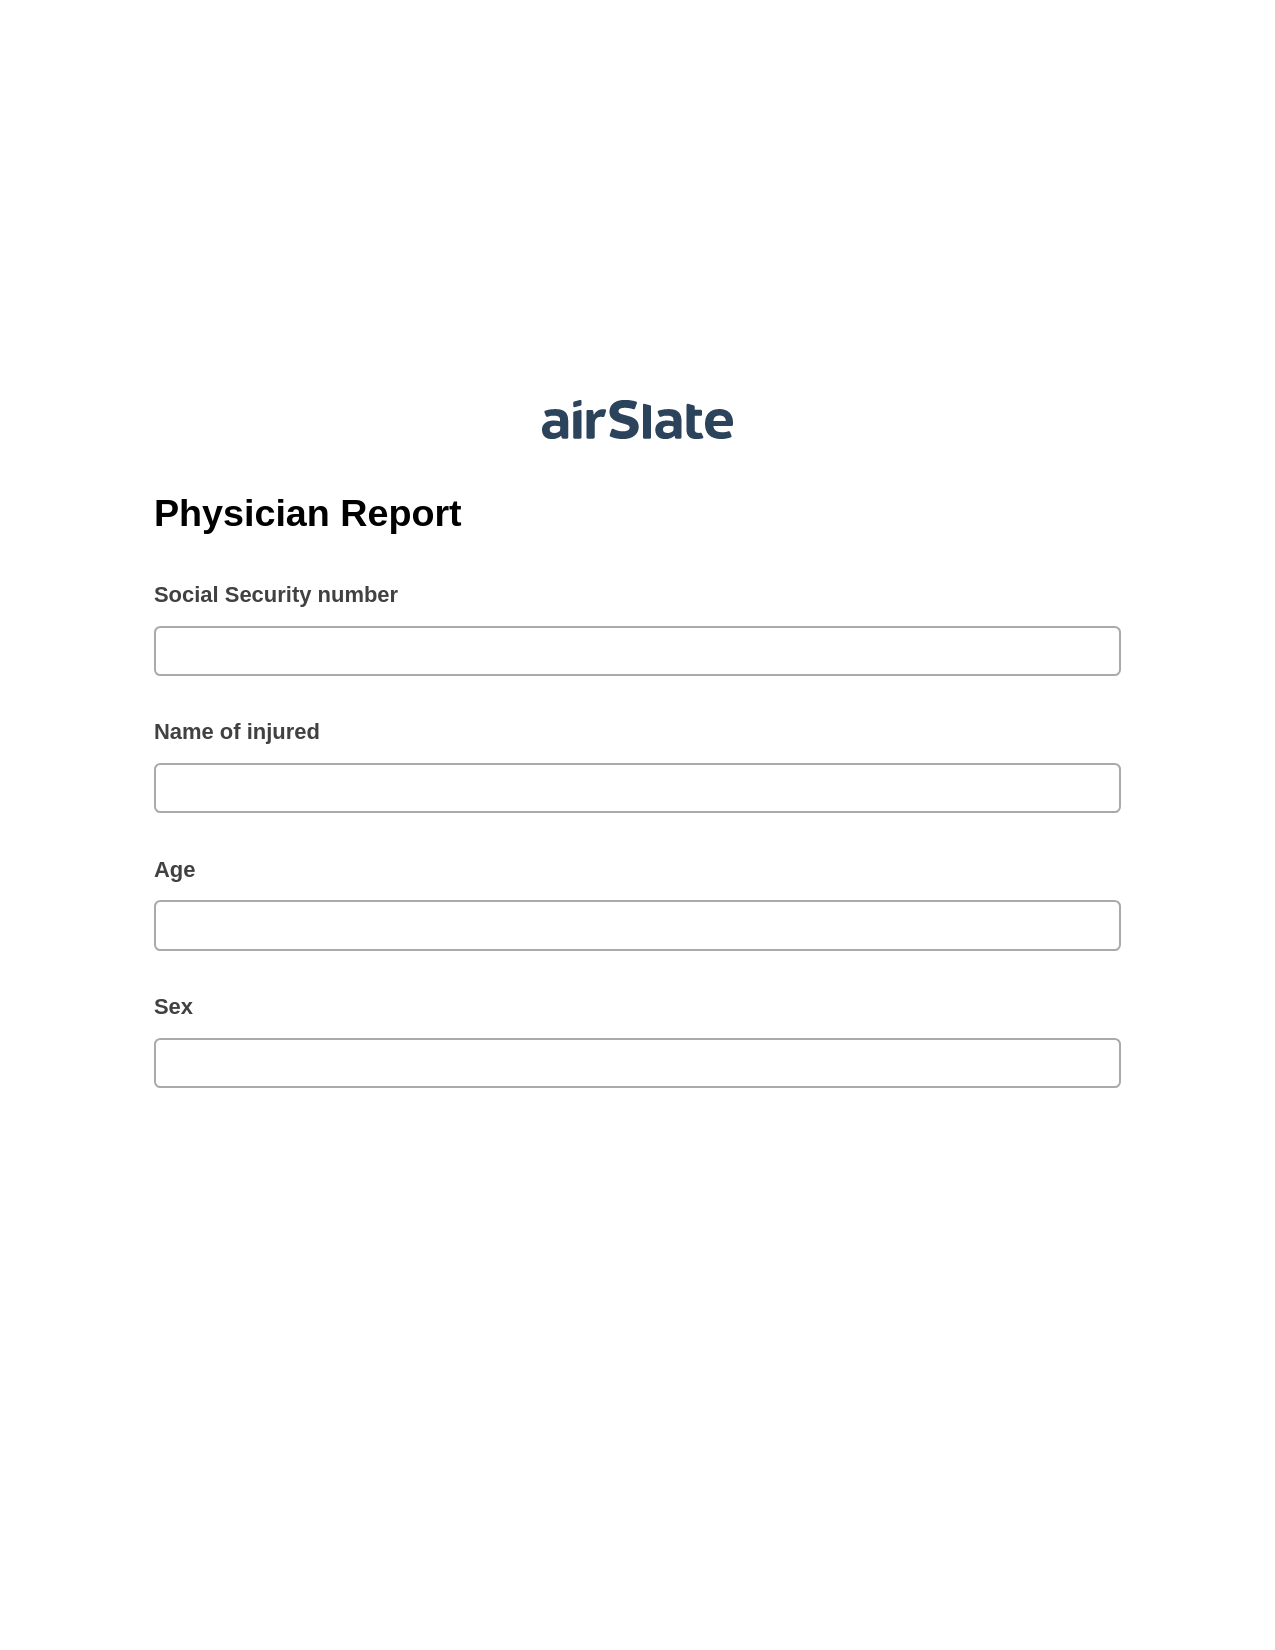 Multirole Physician Report Pre-fill from MS Dynamics 365 Records, Invoke Salesforce Process Bot, Export to MySQL Bot